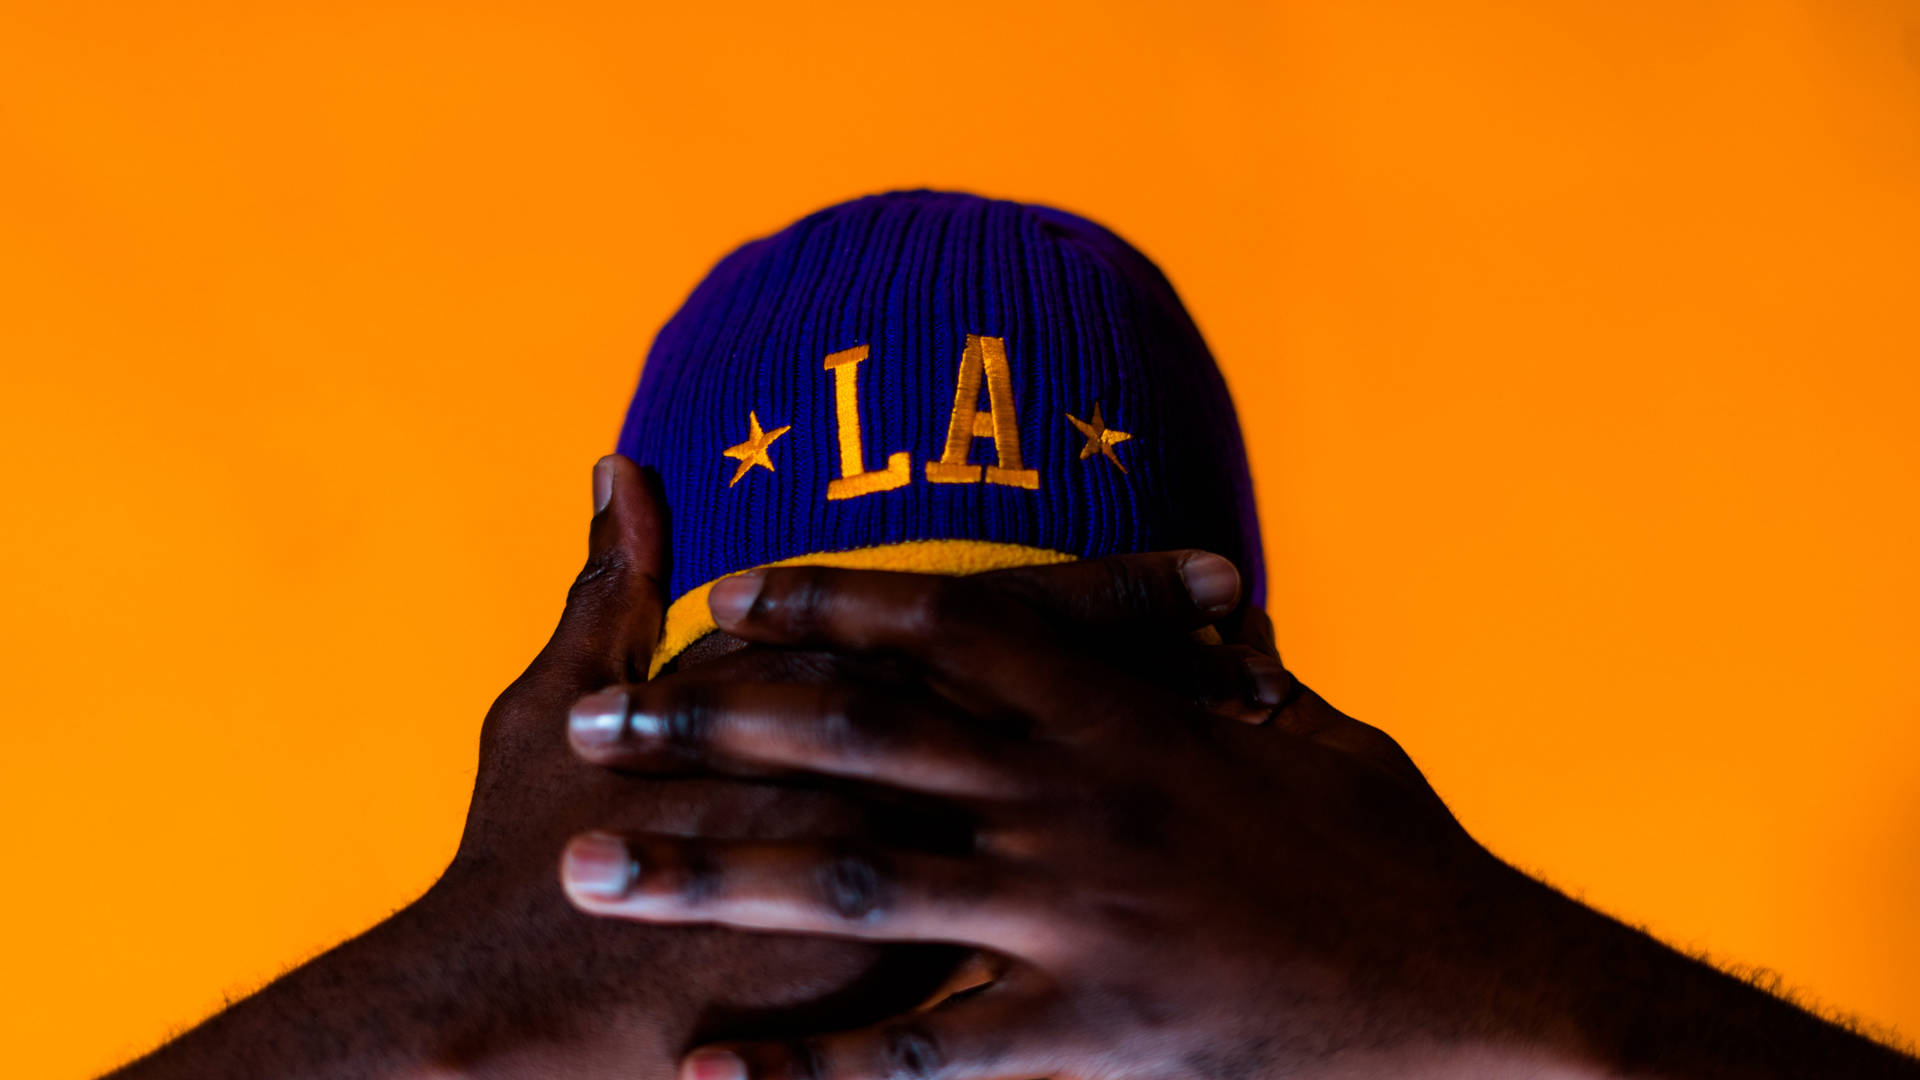 Lakers Hd Cap Background